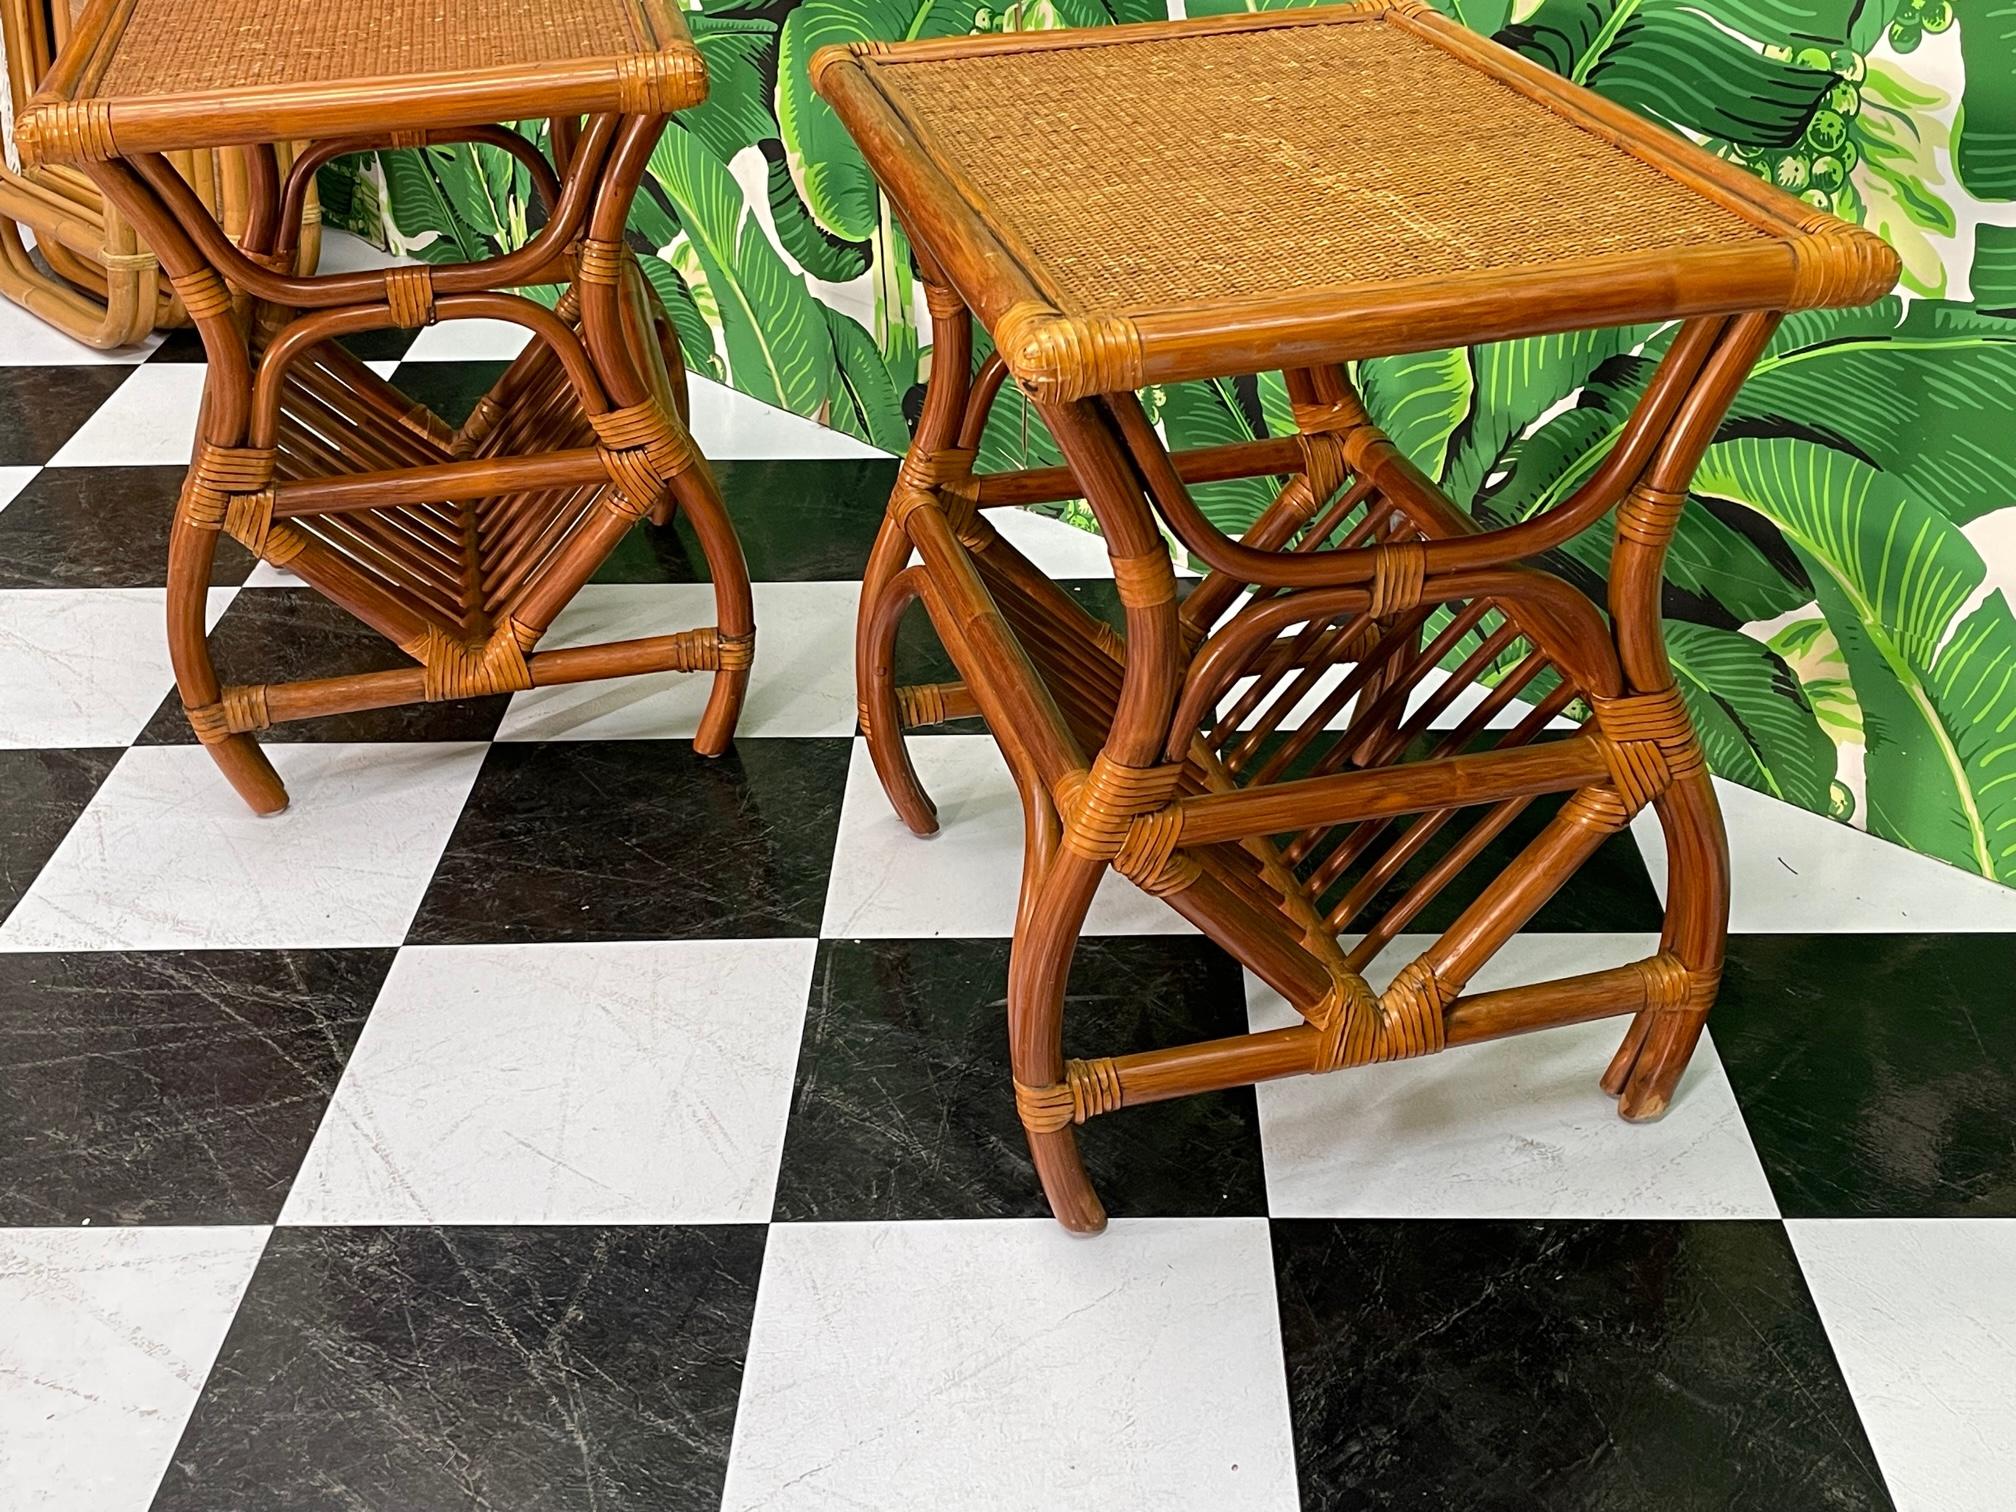 Pair of rattan end tables feature woven wicker tops and magazine racks below. Good vintage condition with imperfections consistent with age, see photos for condition details.
For a shipping quote to your exact zip code, please message us.
